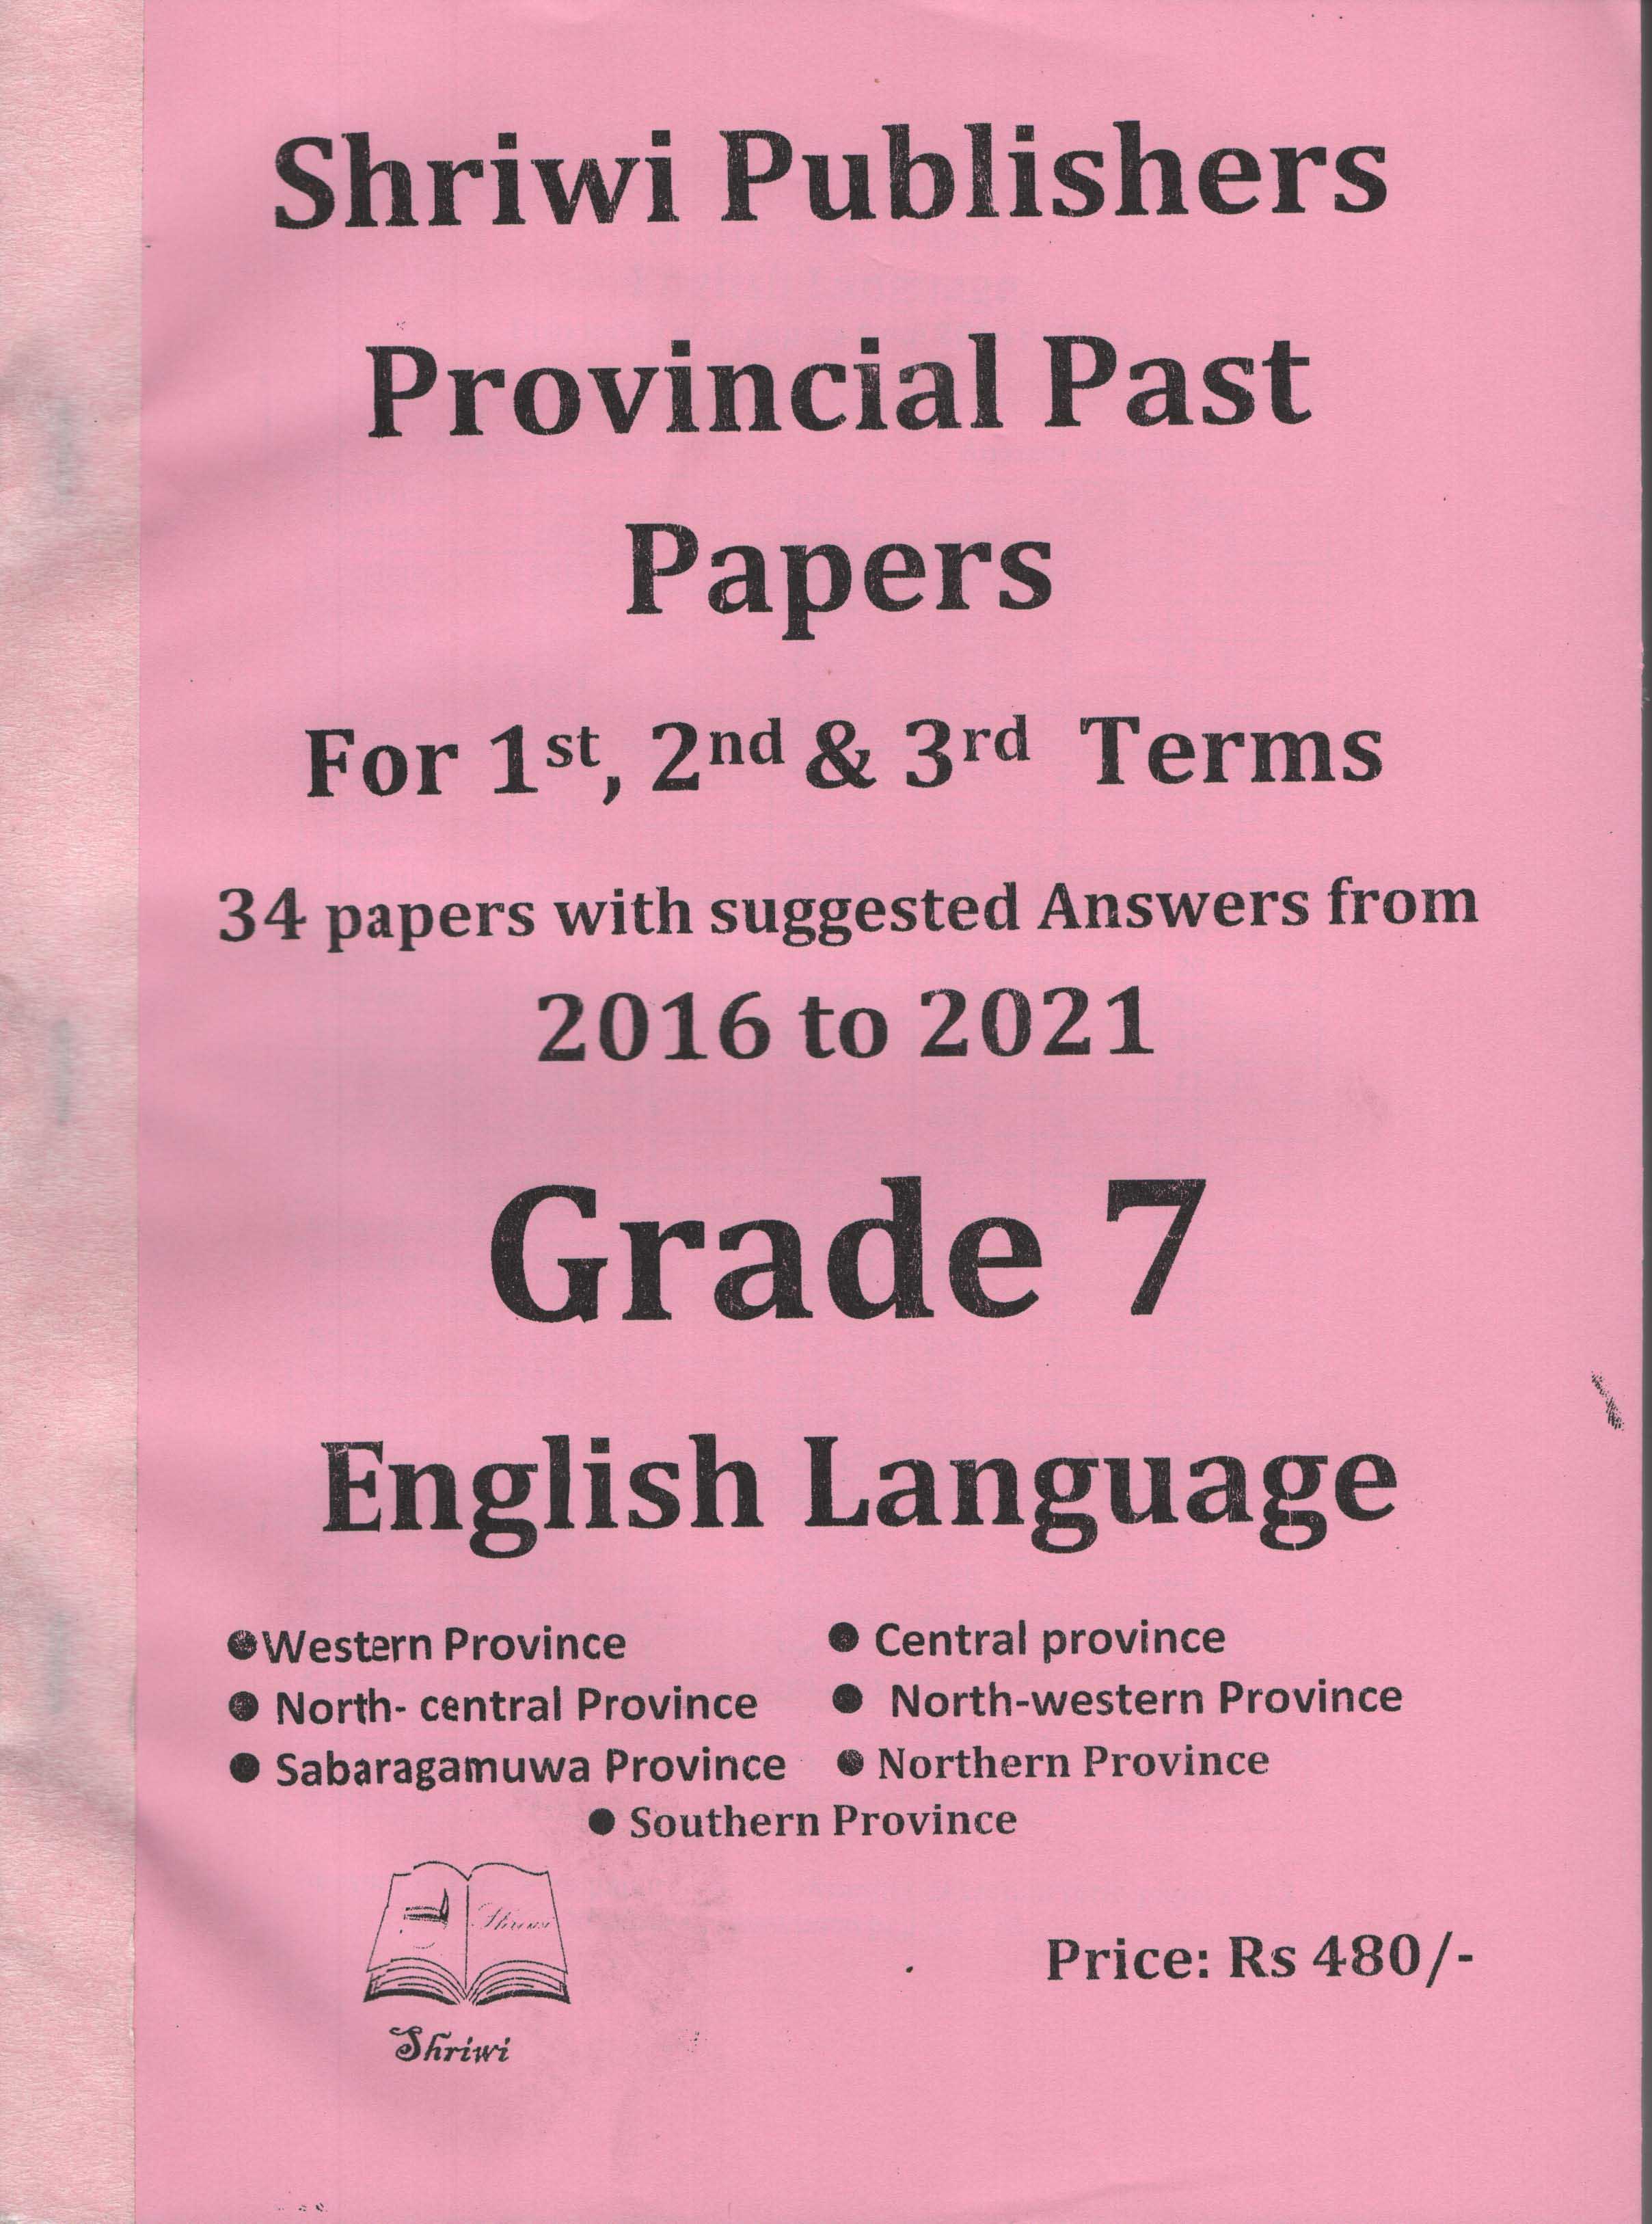 Shriwi Grade 7 English Language Provincial Past Papers For 1st 2nd & 3rd Terms 34 Papers with Suggested AnswersFrom 2016  to 2021